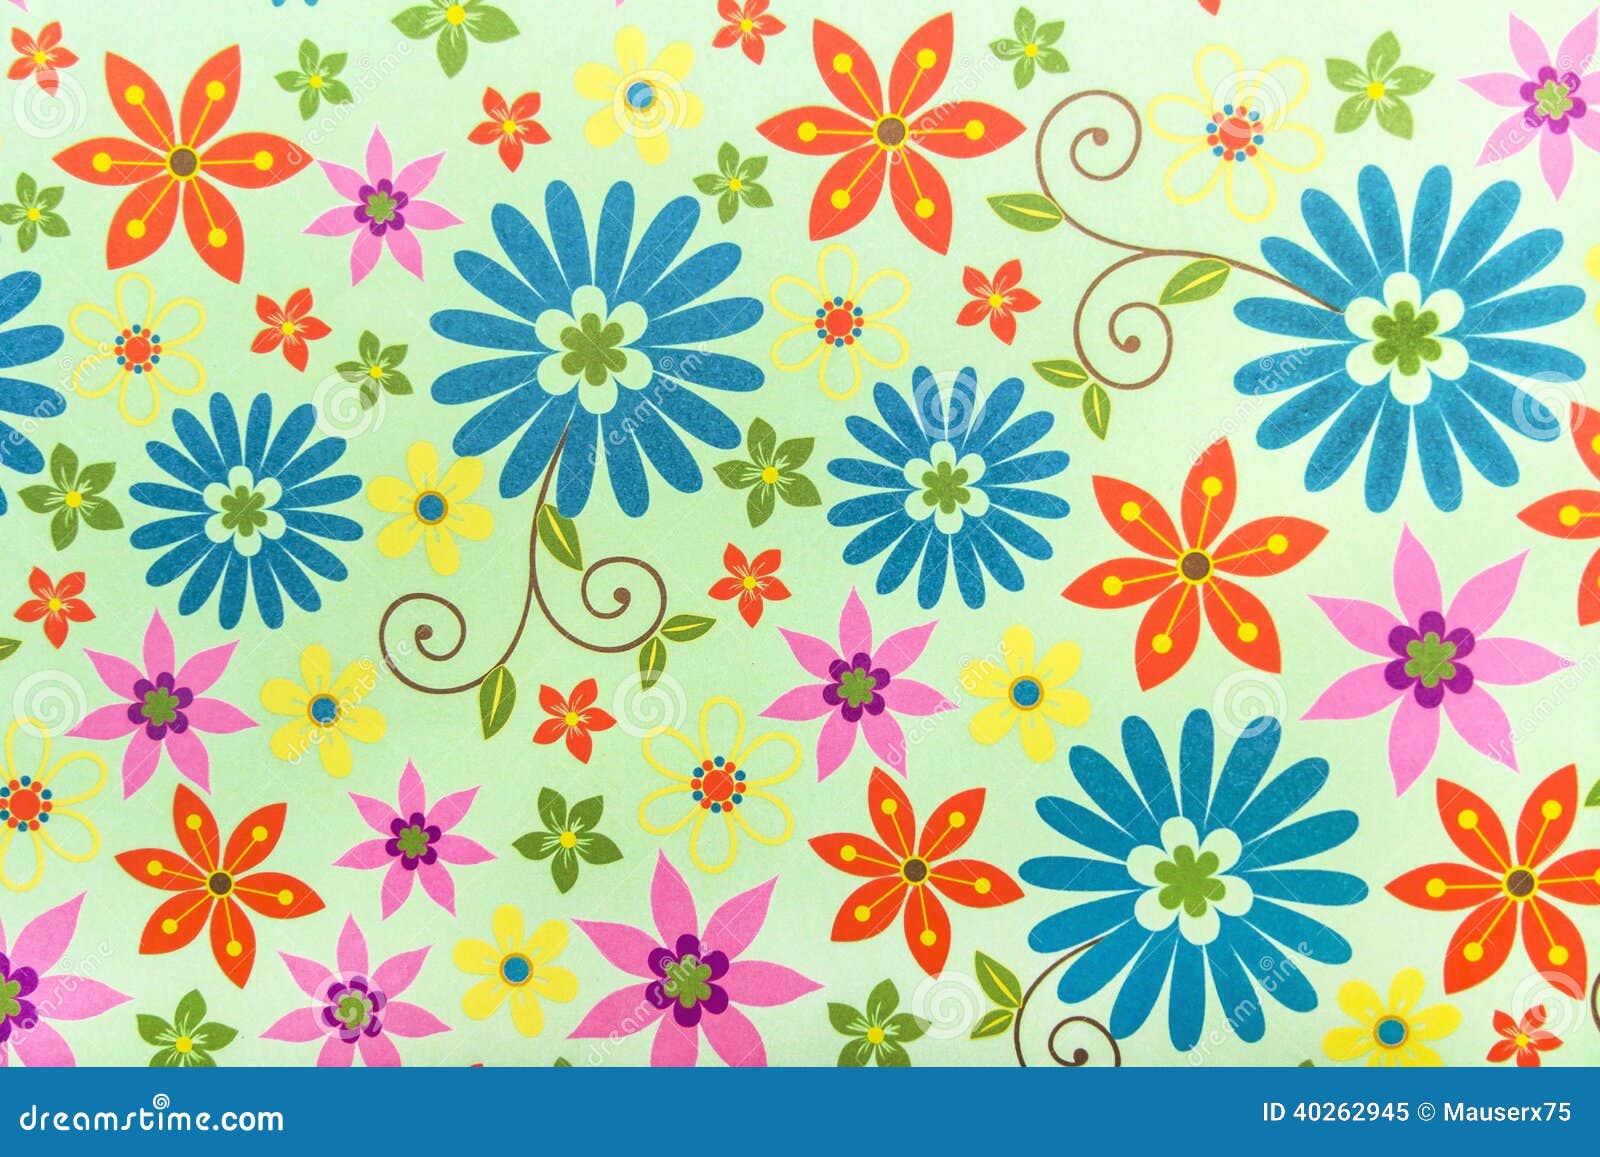 Flowers Background stock image. Image of abstract, colourful - 40262945